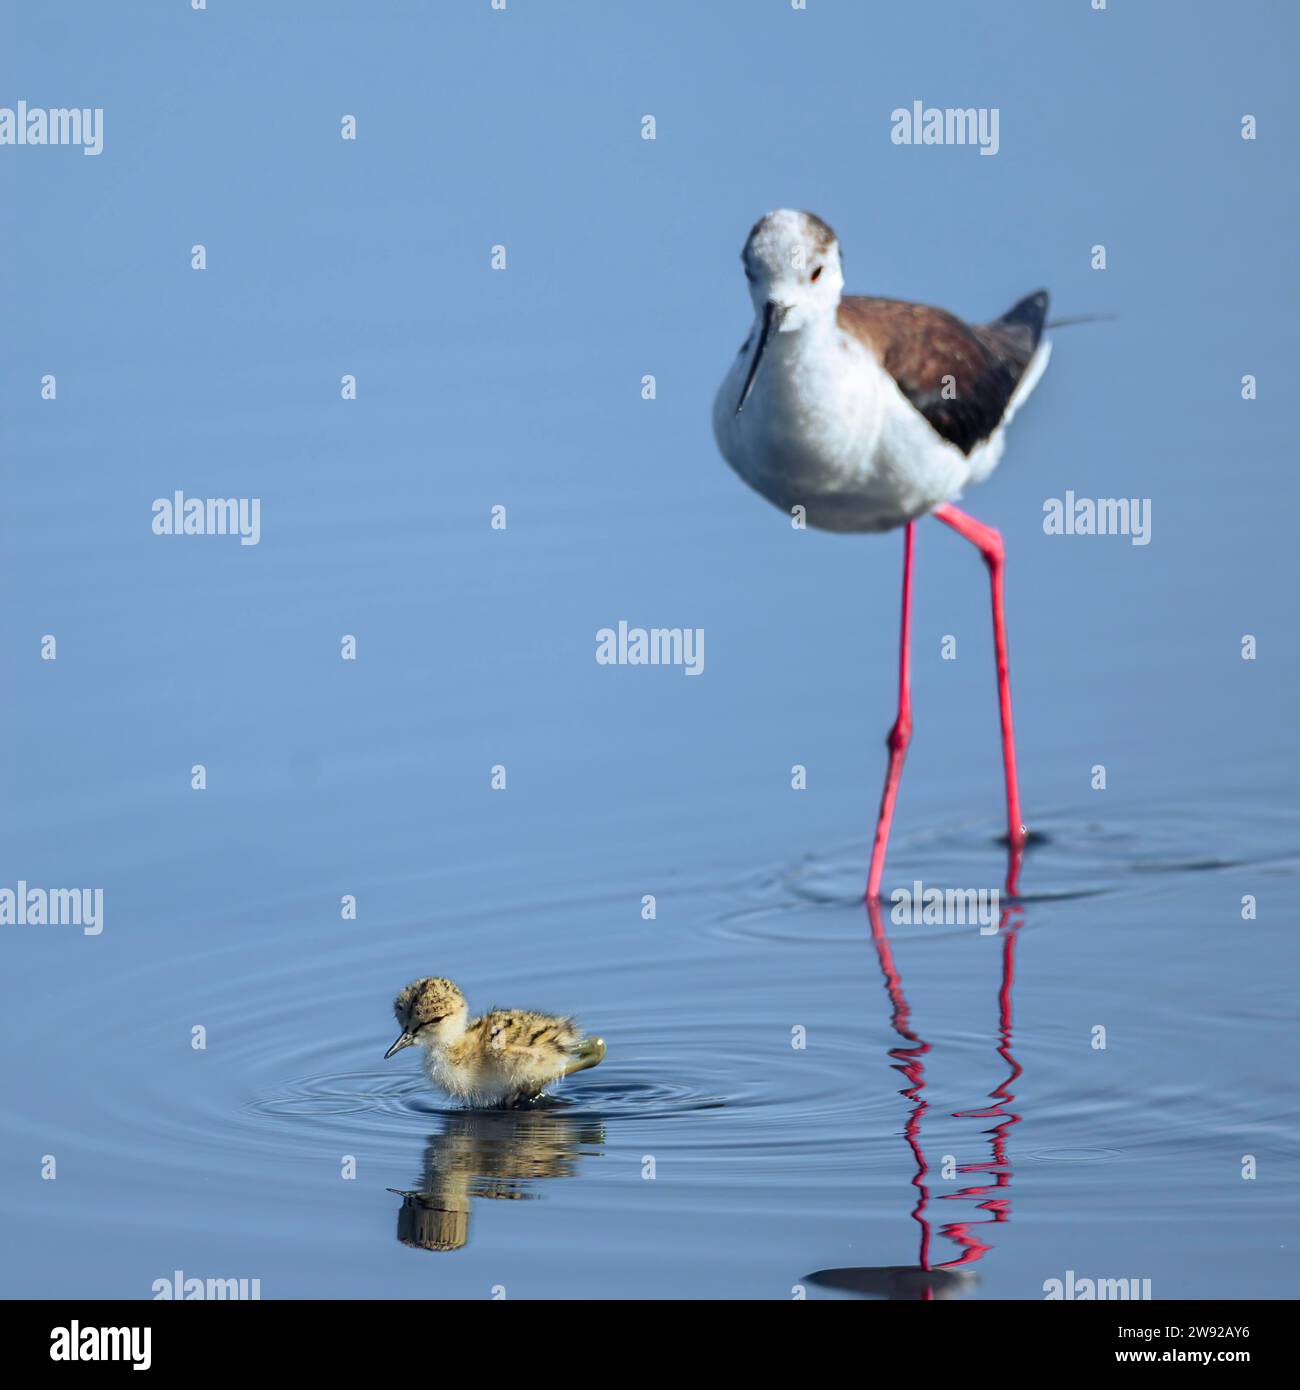 A bird with long red legs standing in clear blue water next to its water reflection Stock Photo